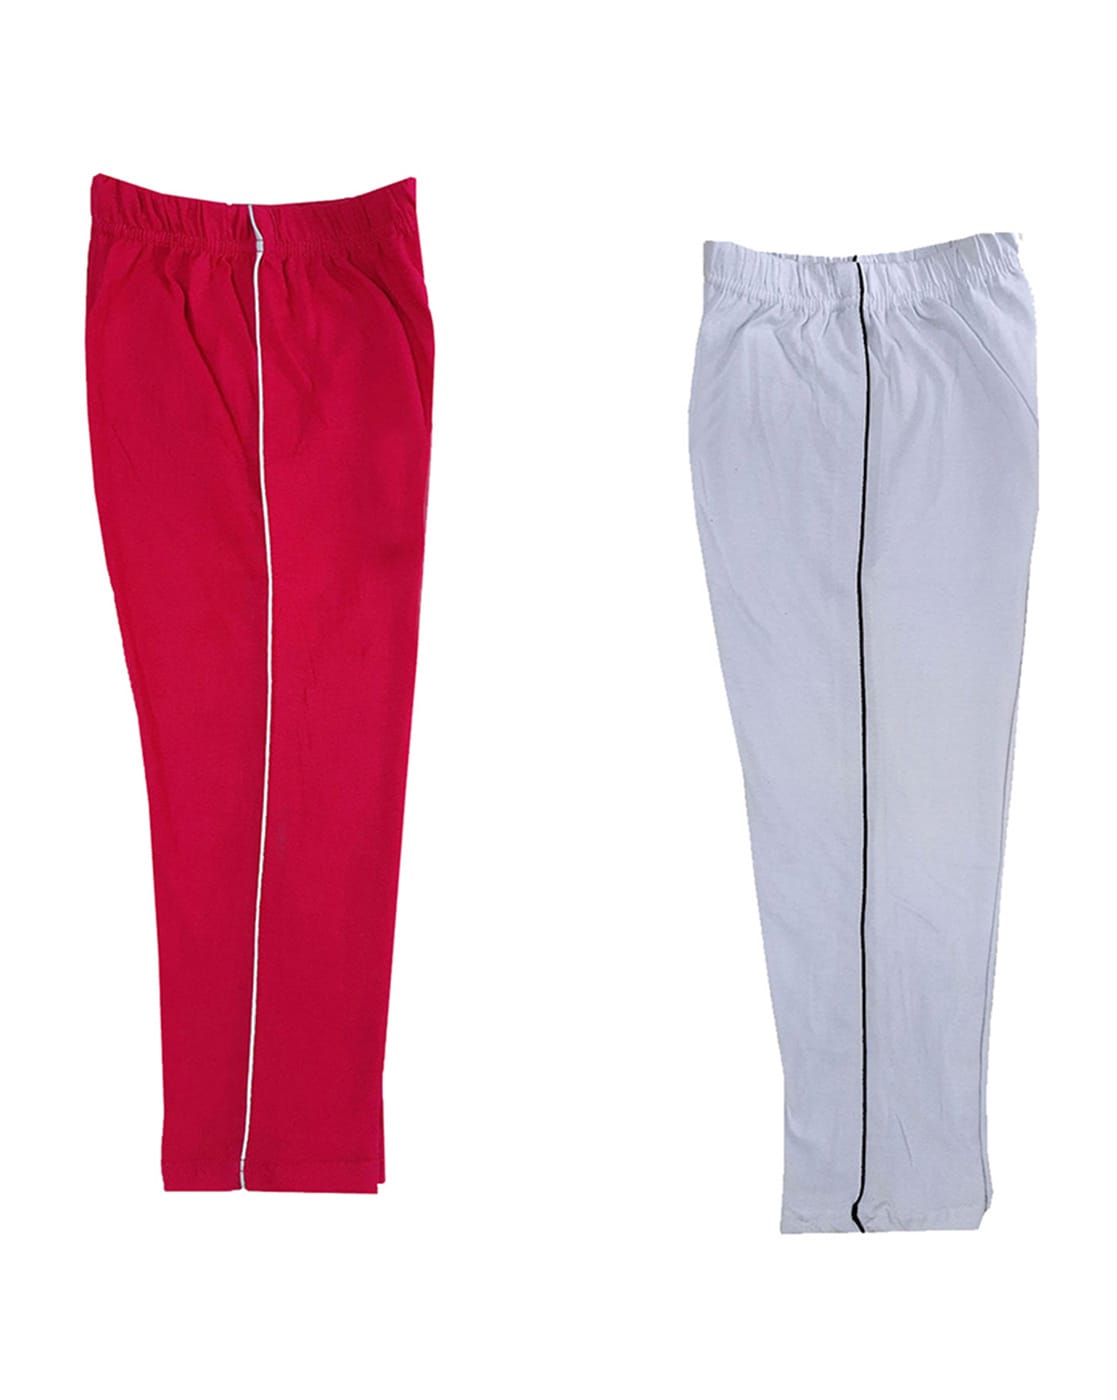 Black Mens Track Pants With Red Stripes Super Poly Lower For Sports  Nightwear | forum.iktva.sa